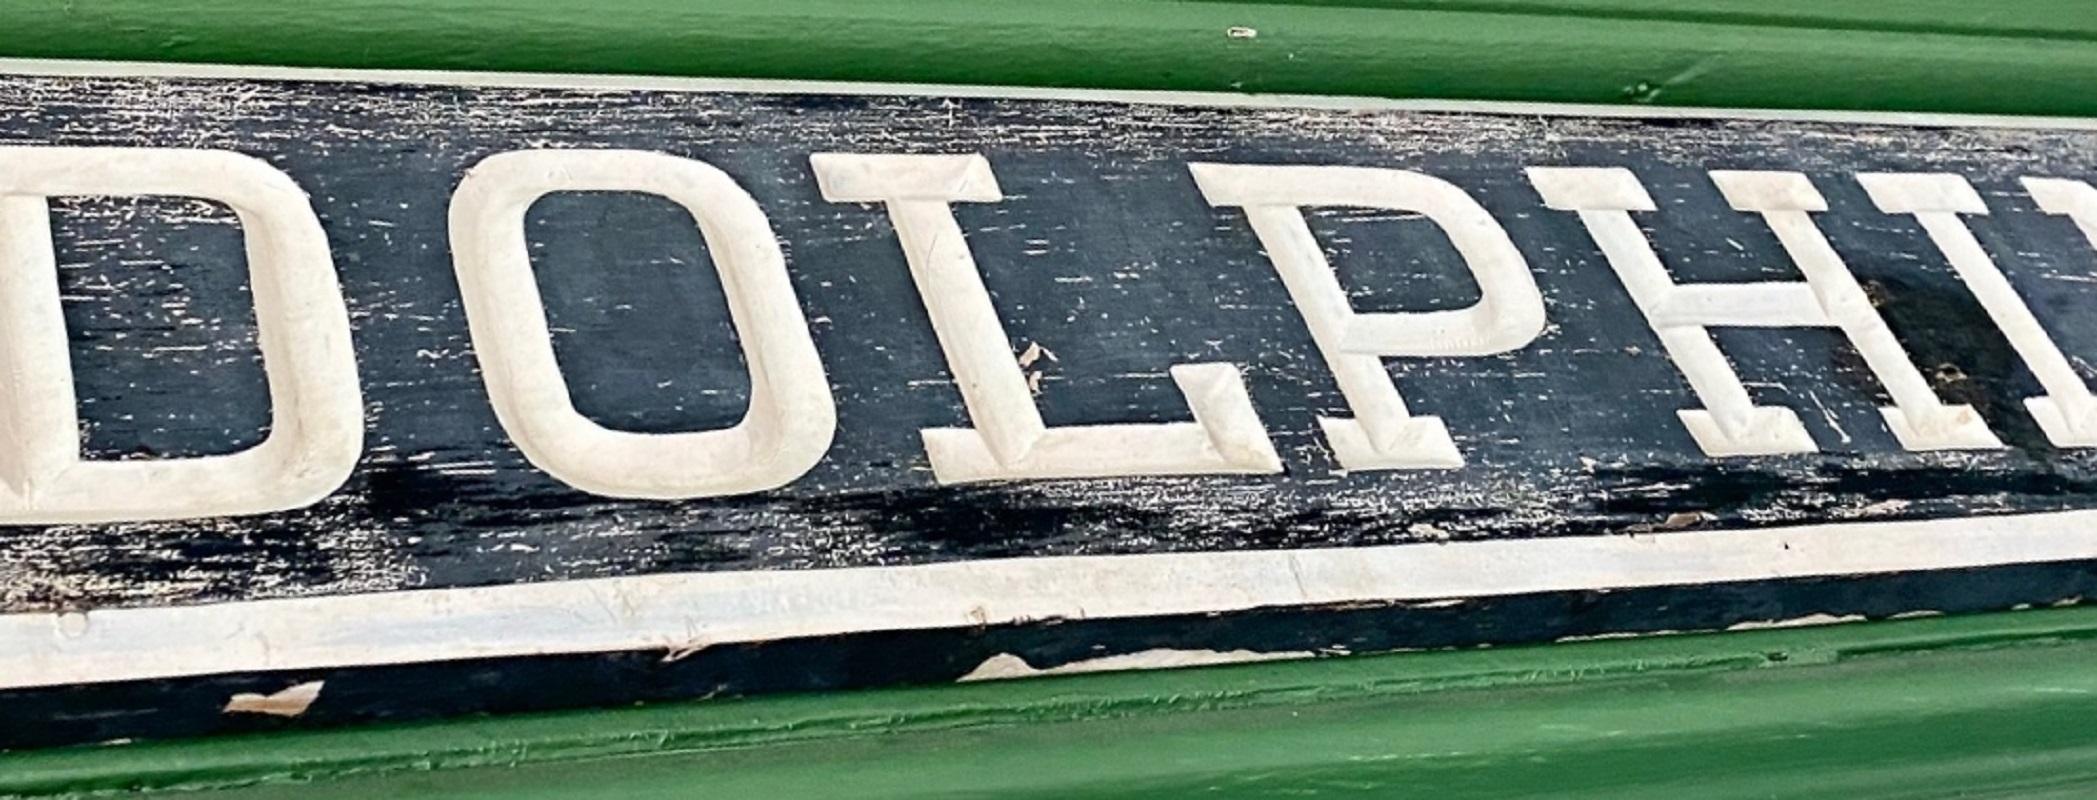 Vintage mid century yacht quarterboard, circa 1950, a hand carved and hand painted yacht name-board in weathered but very strong and stable painted surface. Great name and attractive appearance, in a perfect size.

Actual quarterboards, used are